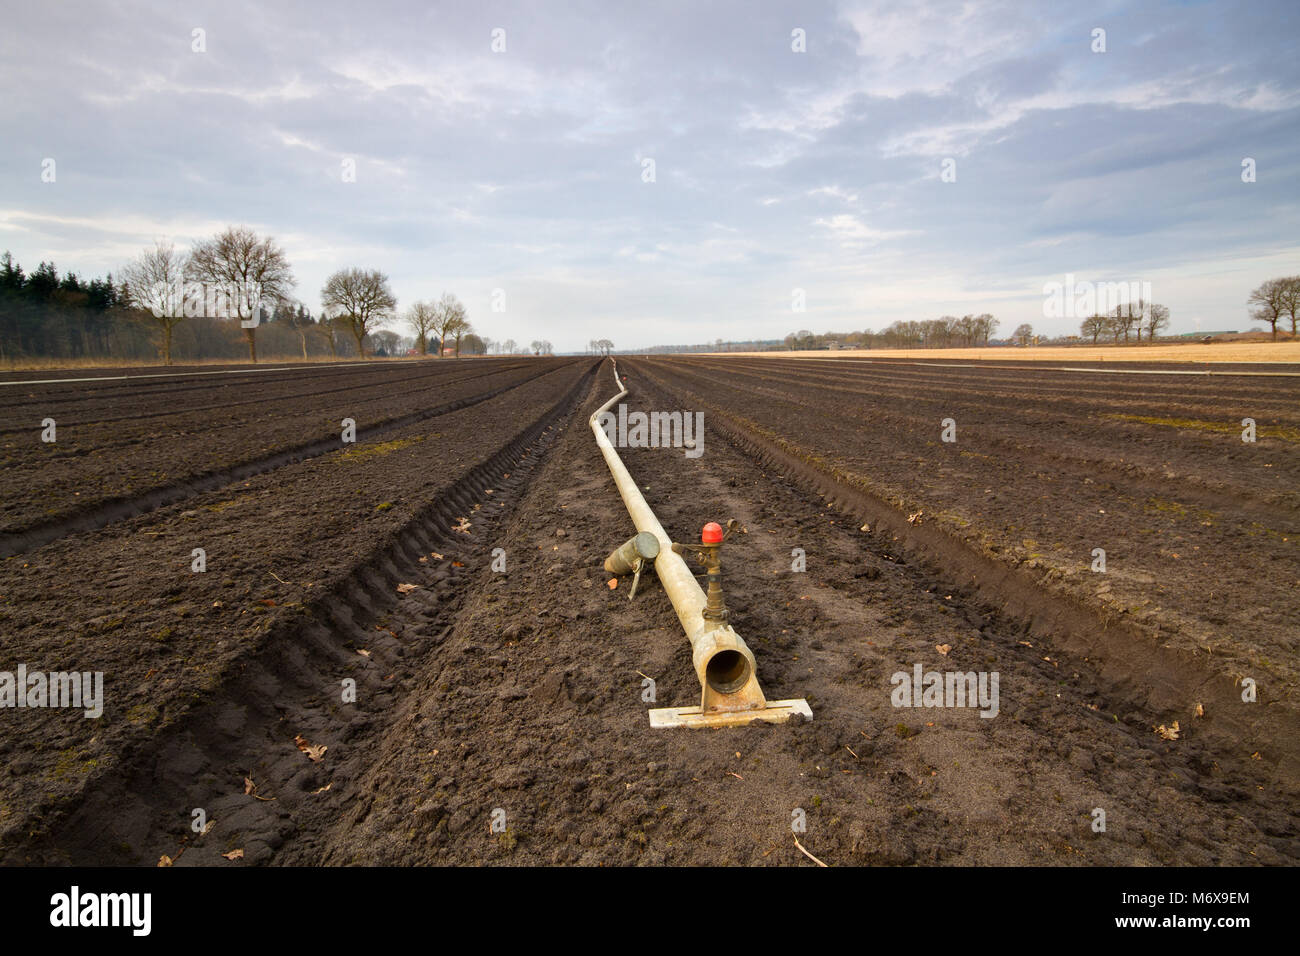 Preparation of farmland in early spring for growing tulip bulbs: pipe for sprinkler system in flower beds Stock Photo